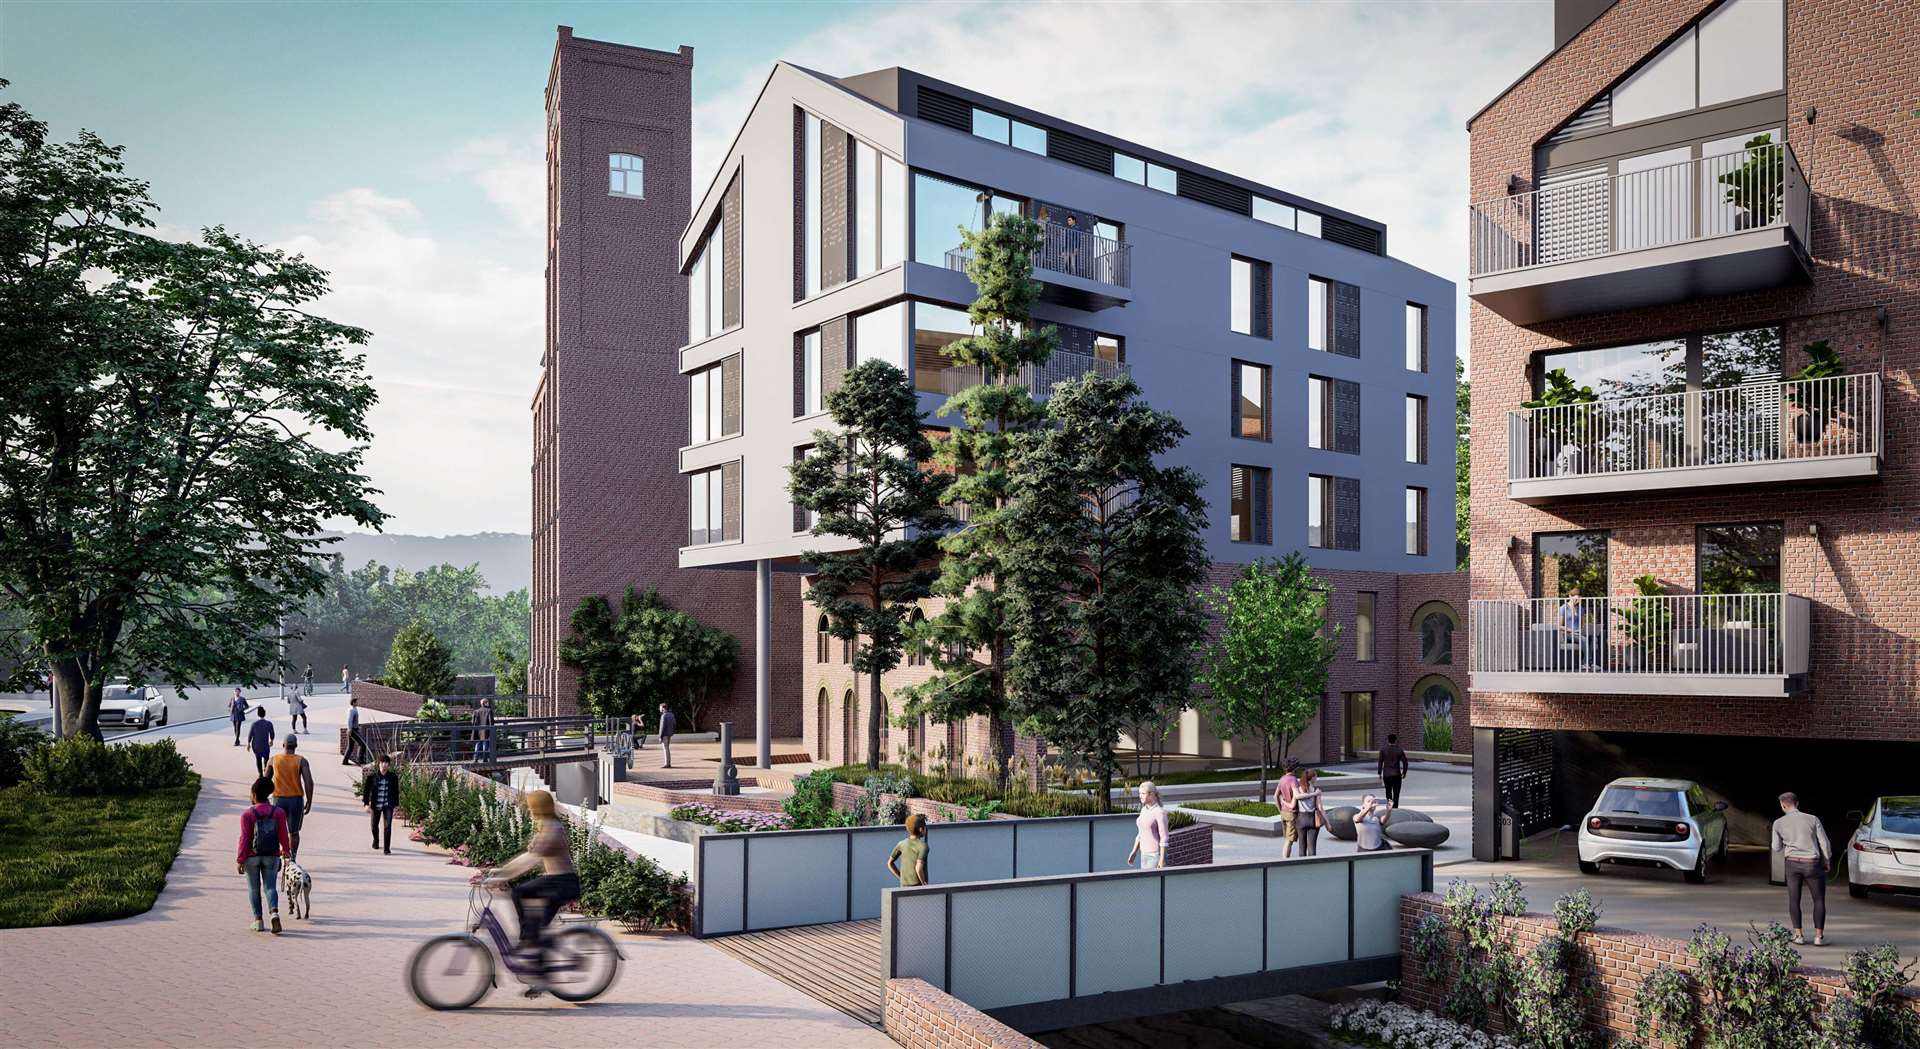 The plan was approved unanimously by borough councillors. Picture: Hollaway Studio